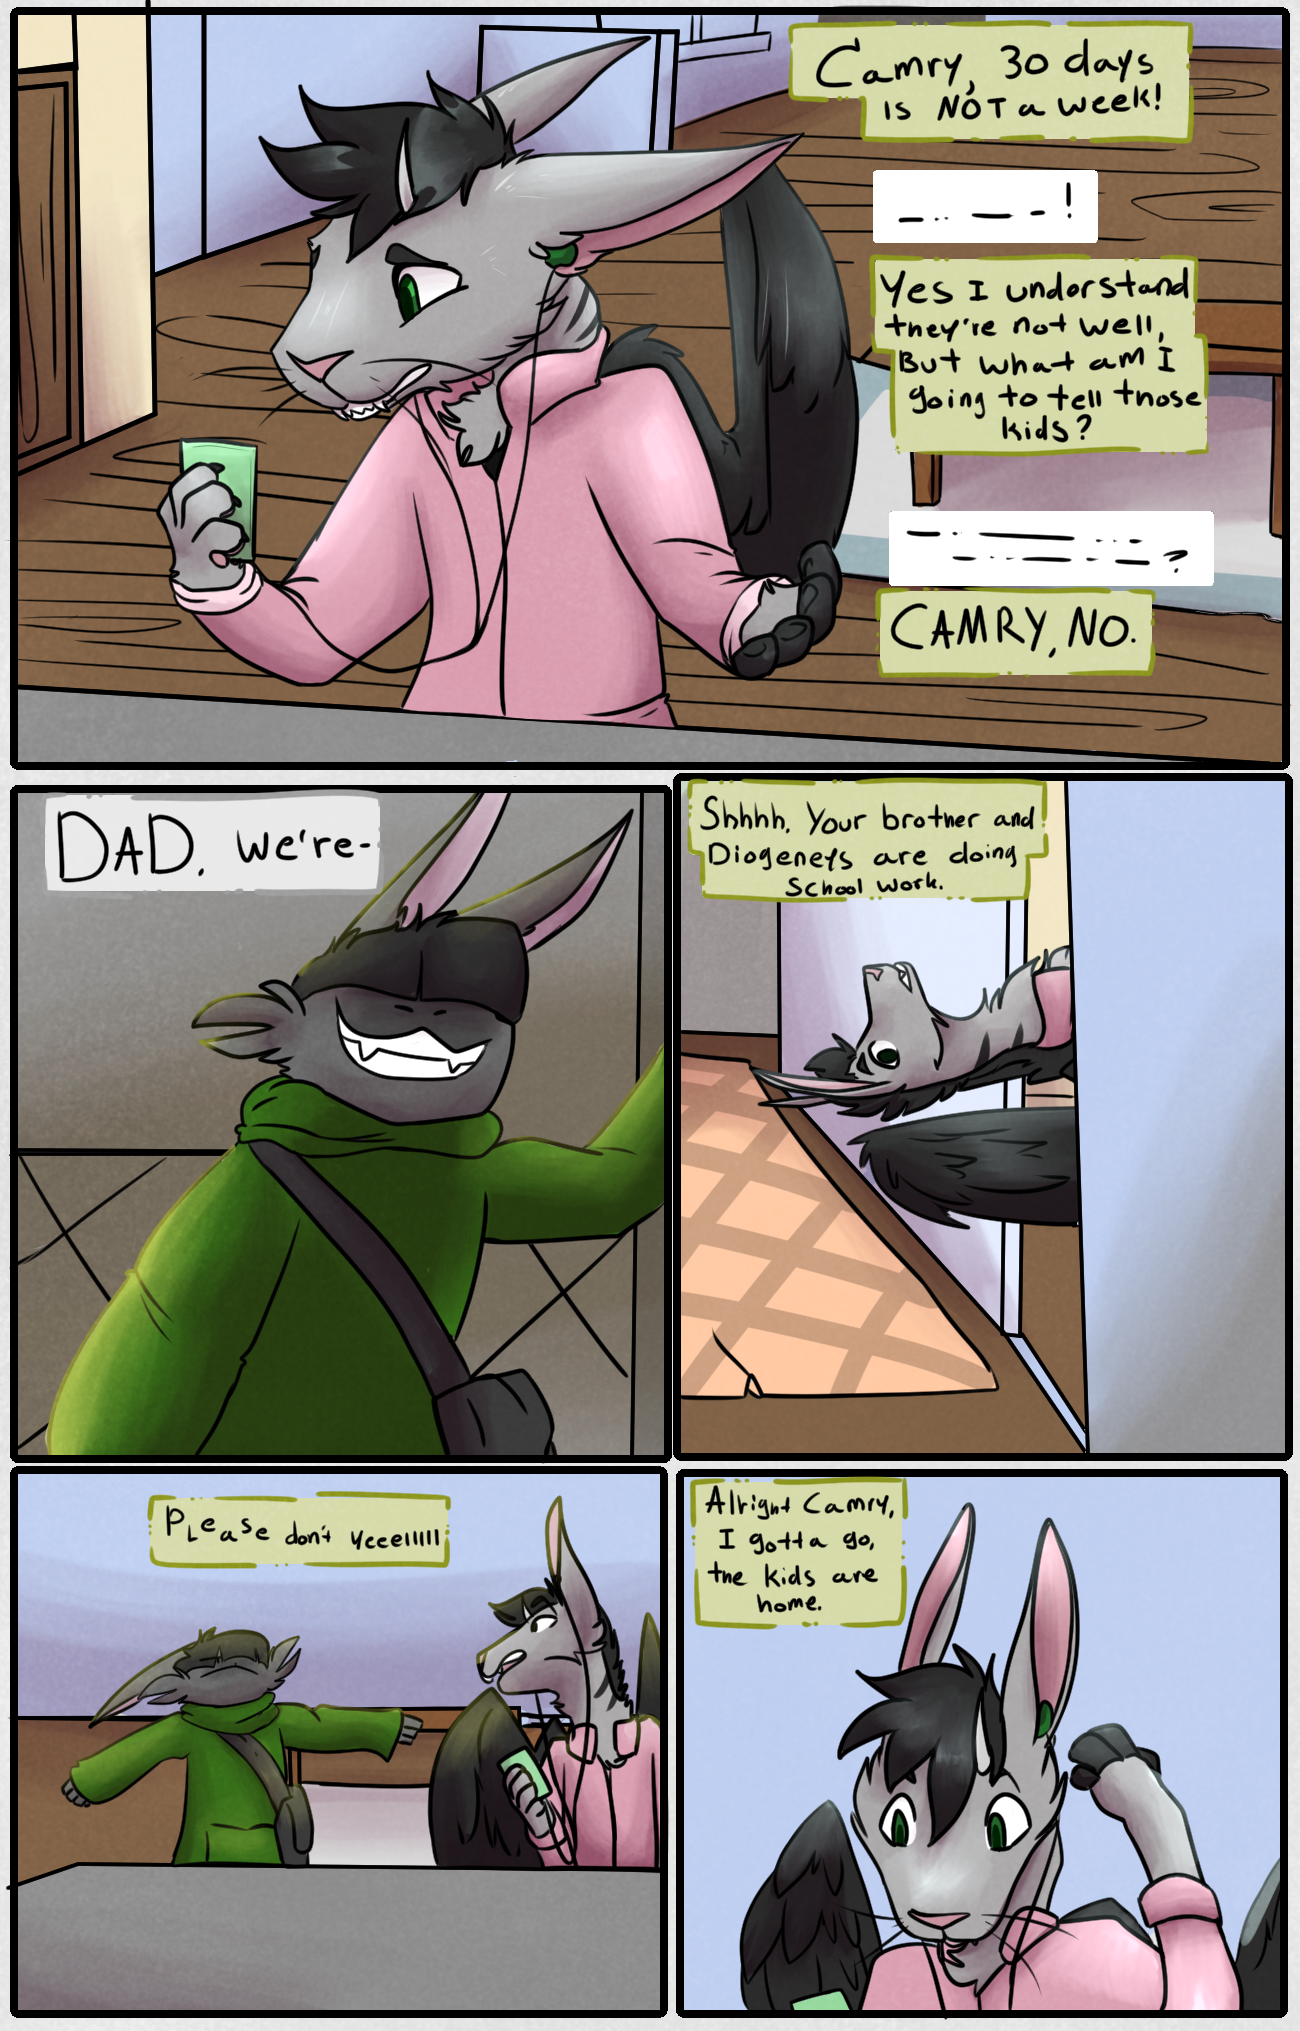 Page 79 - no yelling